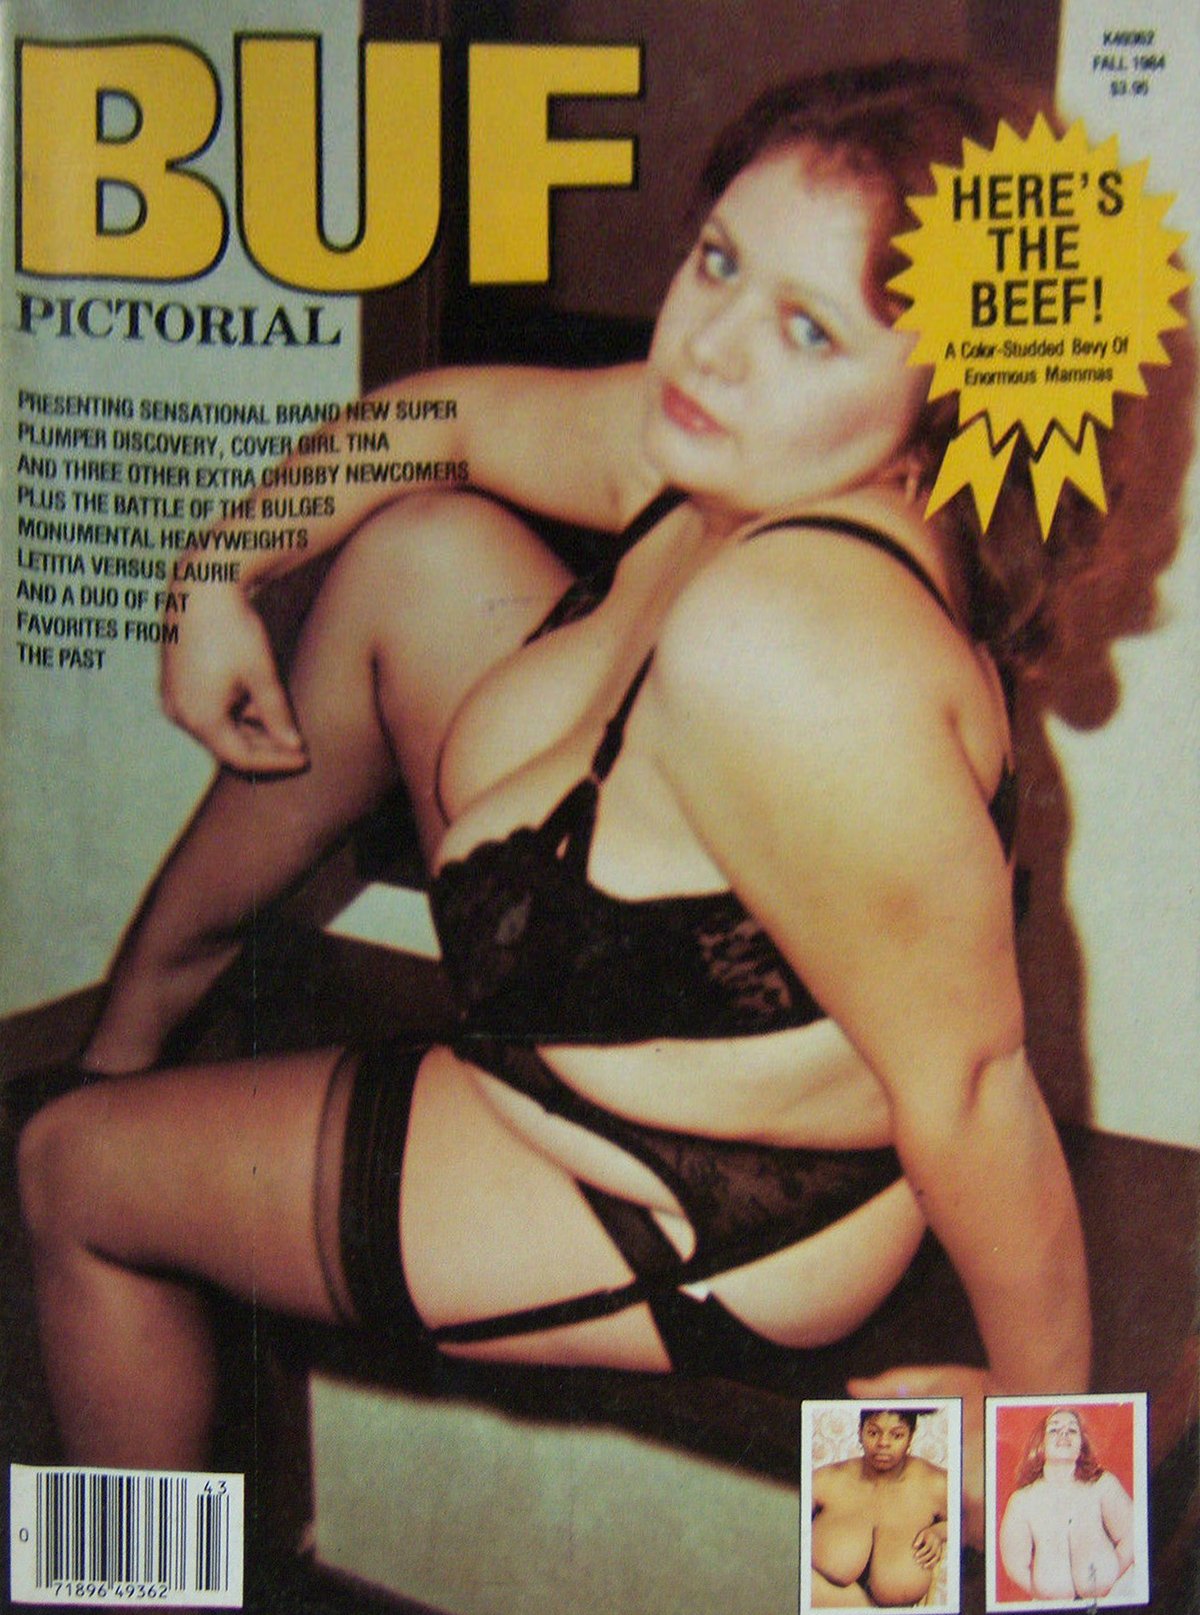 BUF Fall 1984 magazine back issue BUF (Big Up Front) Swinger magizine back copy BUF Fall 1984 Adult Magazine Back Issue Specializing in Naked Big Breasted Women, Big Up Front Swingers are Girls with Big Tits. Presenting Sensational Brand New Super Plumper Discovery, Cover Girl Tina And Three Other Extra.